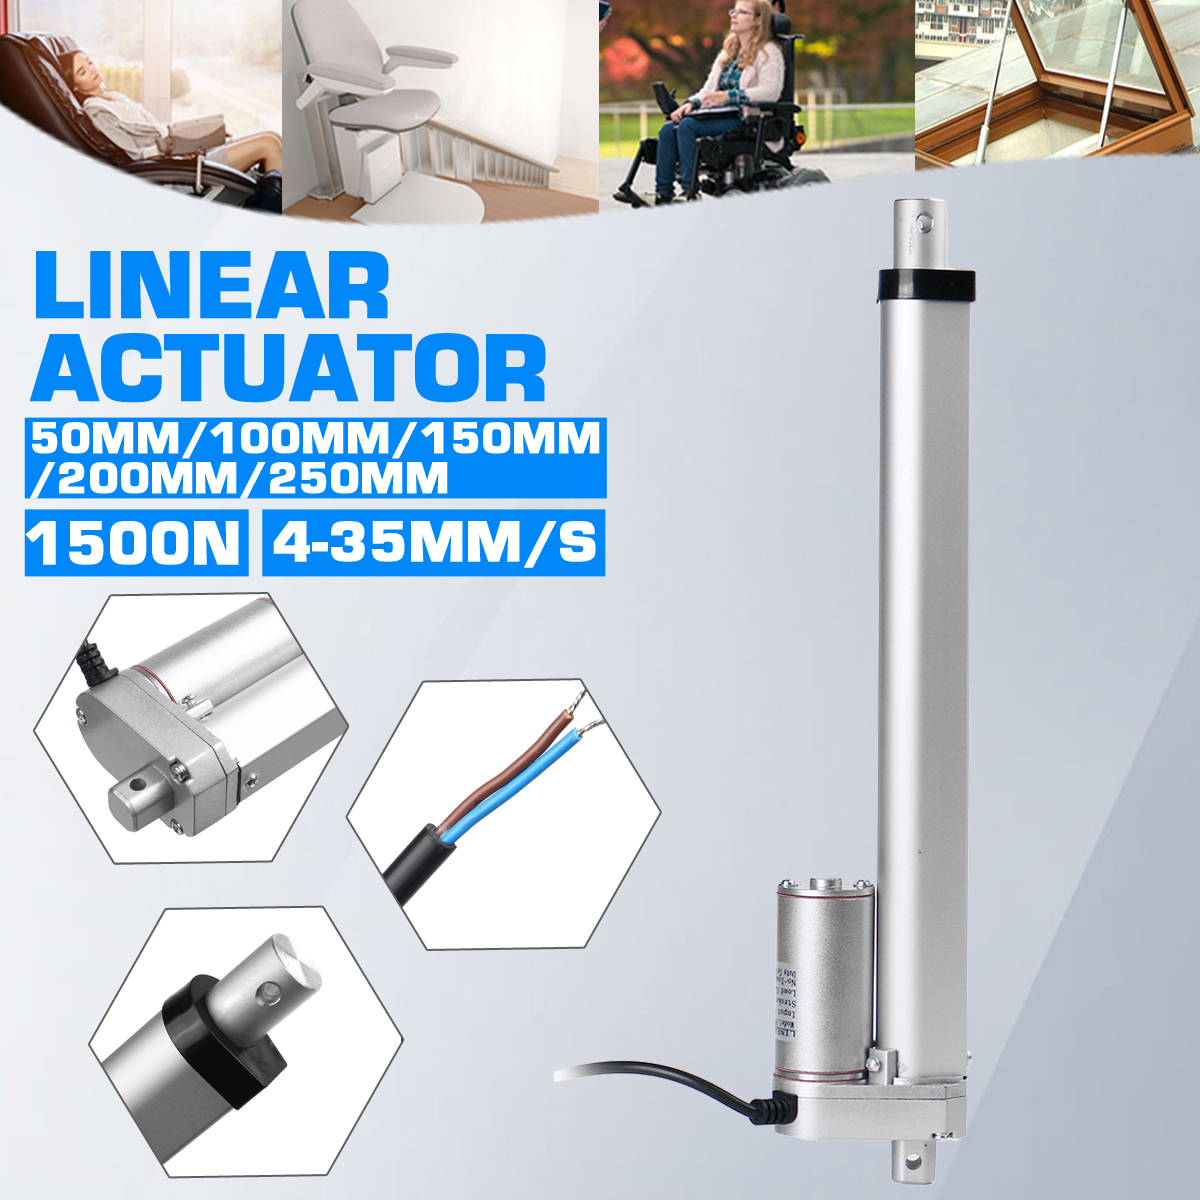 12V-Linear-Actuator-Linear-Motor-Moving-Distance-Stroke-50100150200250mm-1500N-Max-1684063-2